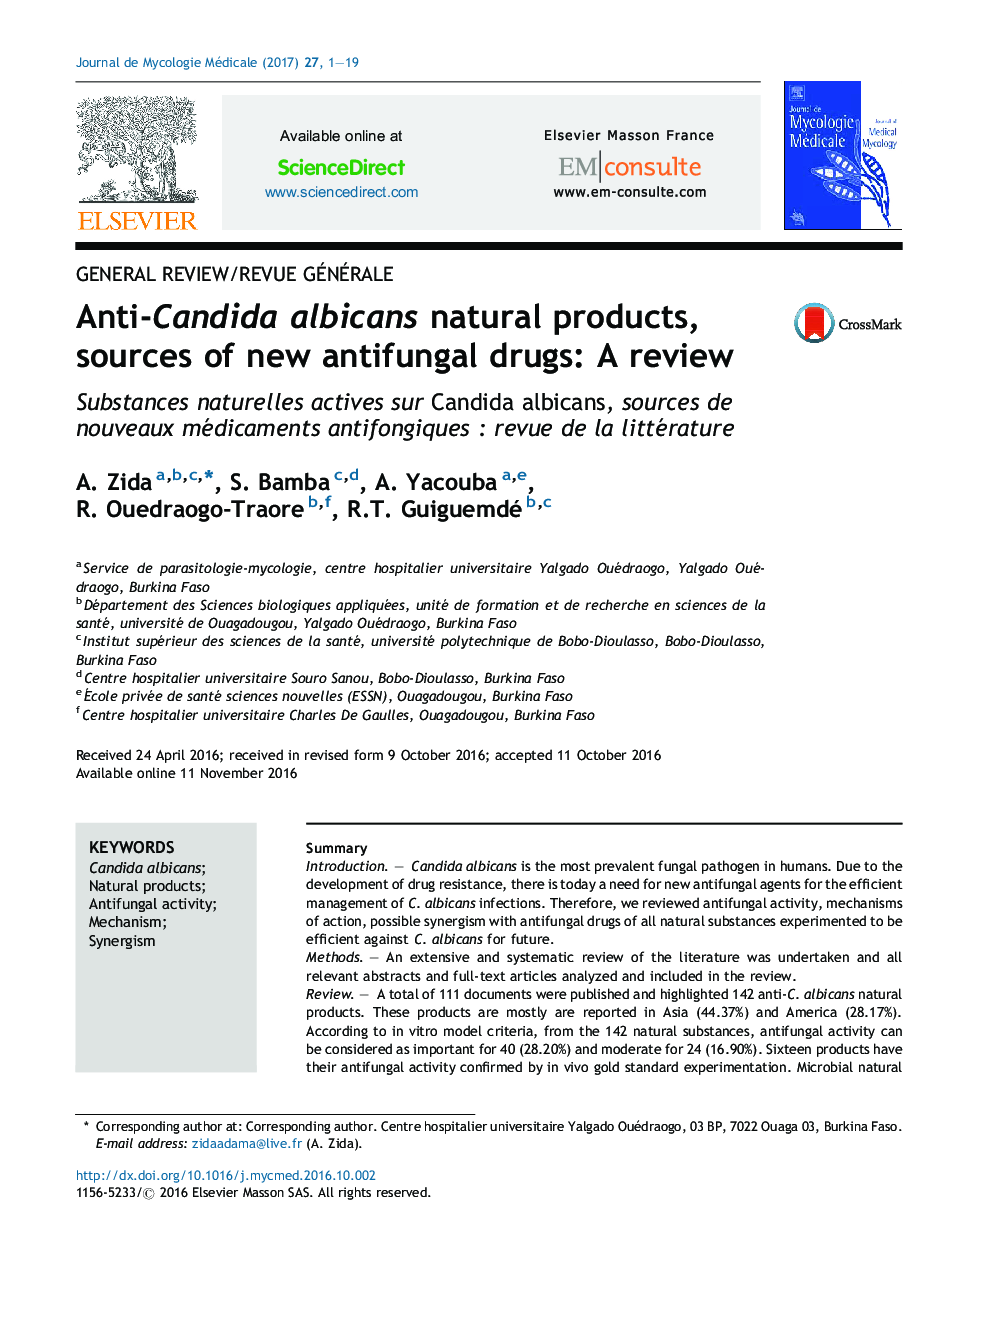 Anti-Candida albicans natural products, sources of new antifungal drugs: A review